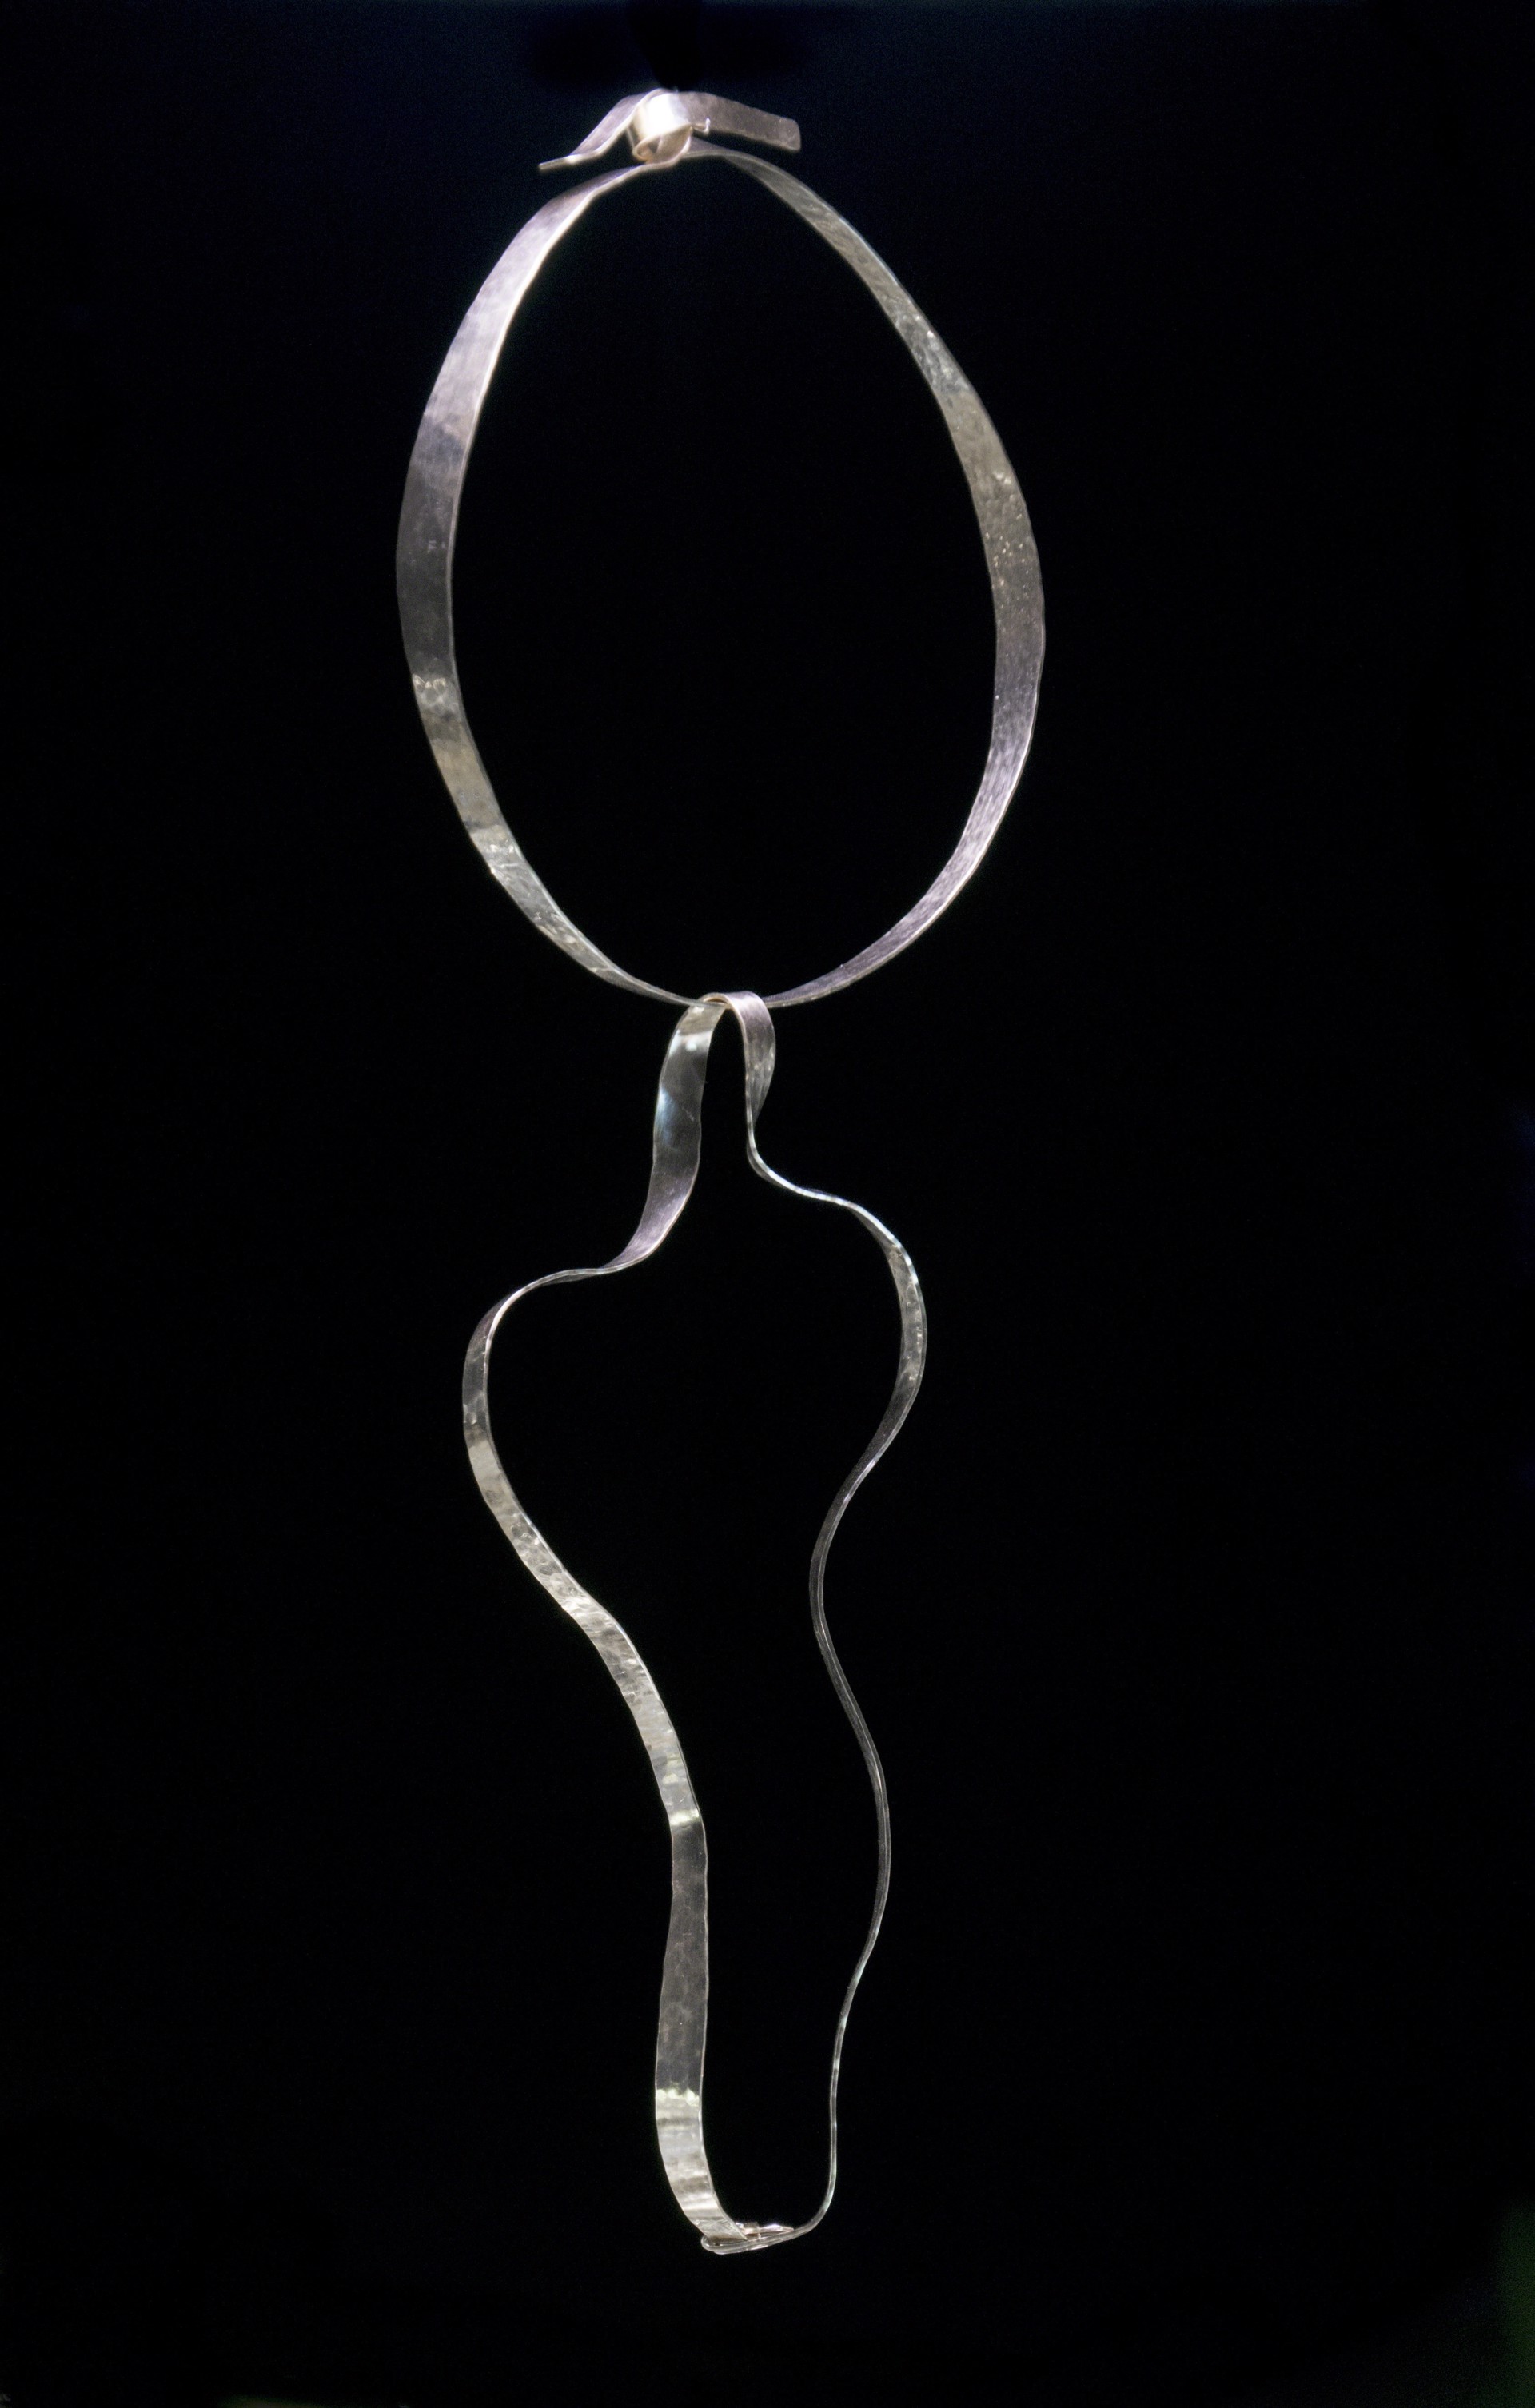 "Waves" Necklace by Jacques Jarrige